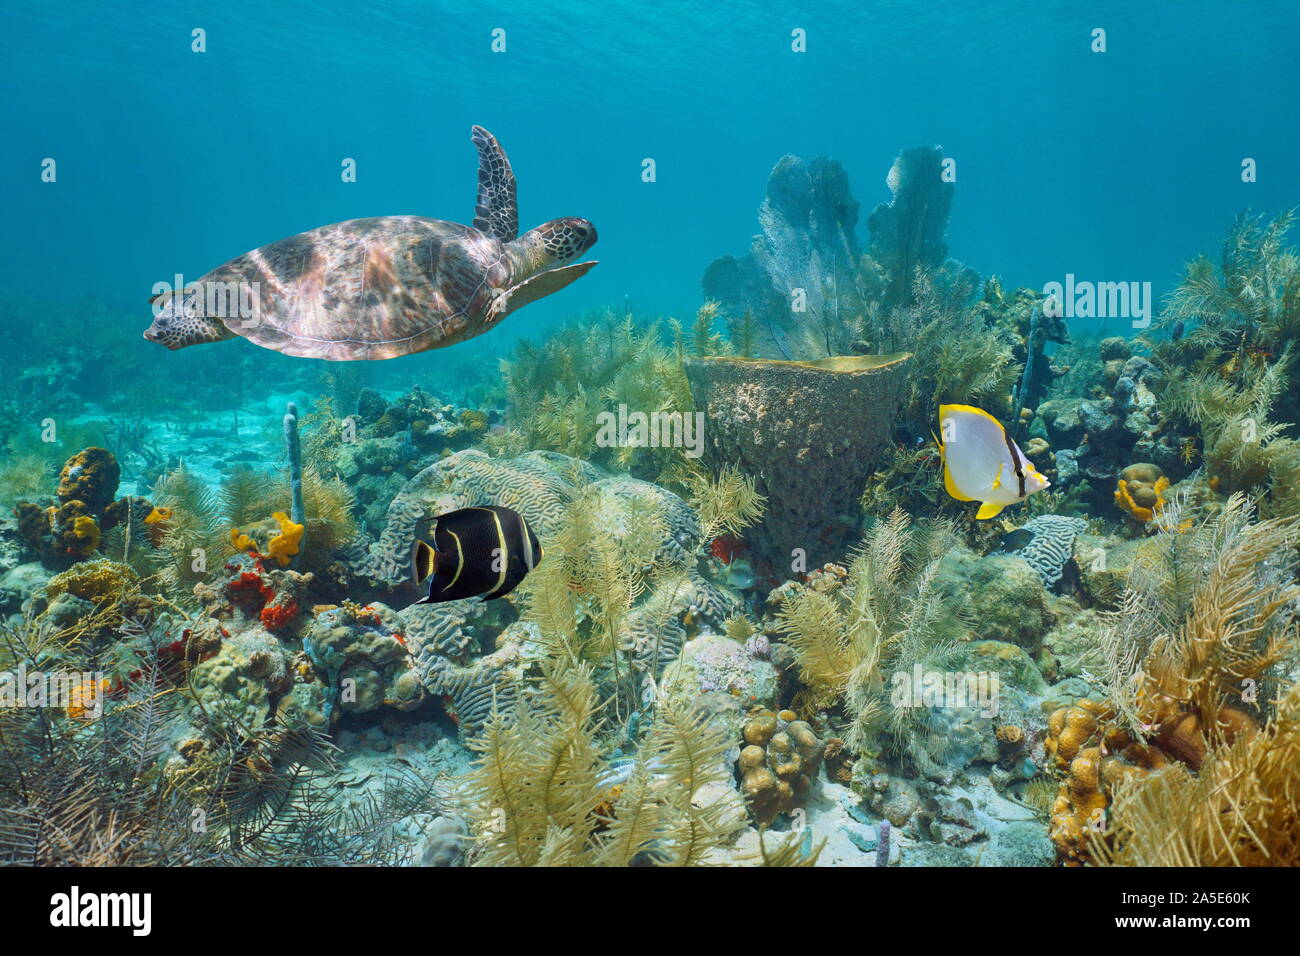 Caribbean coral reef underwater with a green sea turtle and tropical fish, Martinique, Lesser Antilles Stock Photo